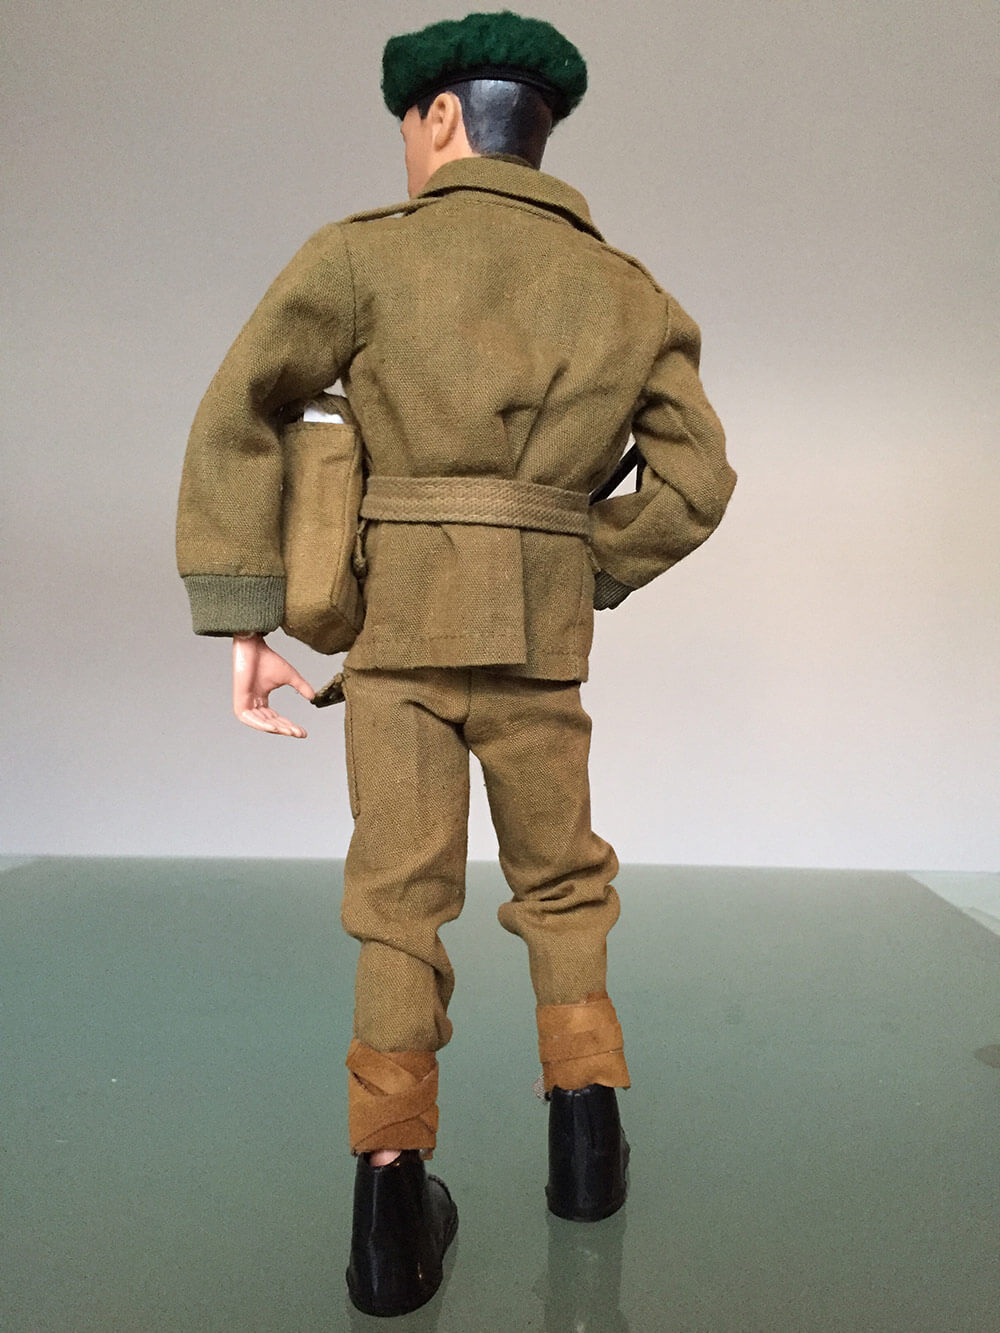 Vintage Action Man Royal Marines 1st Issue Tunic and Beret